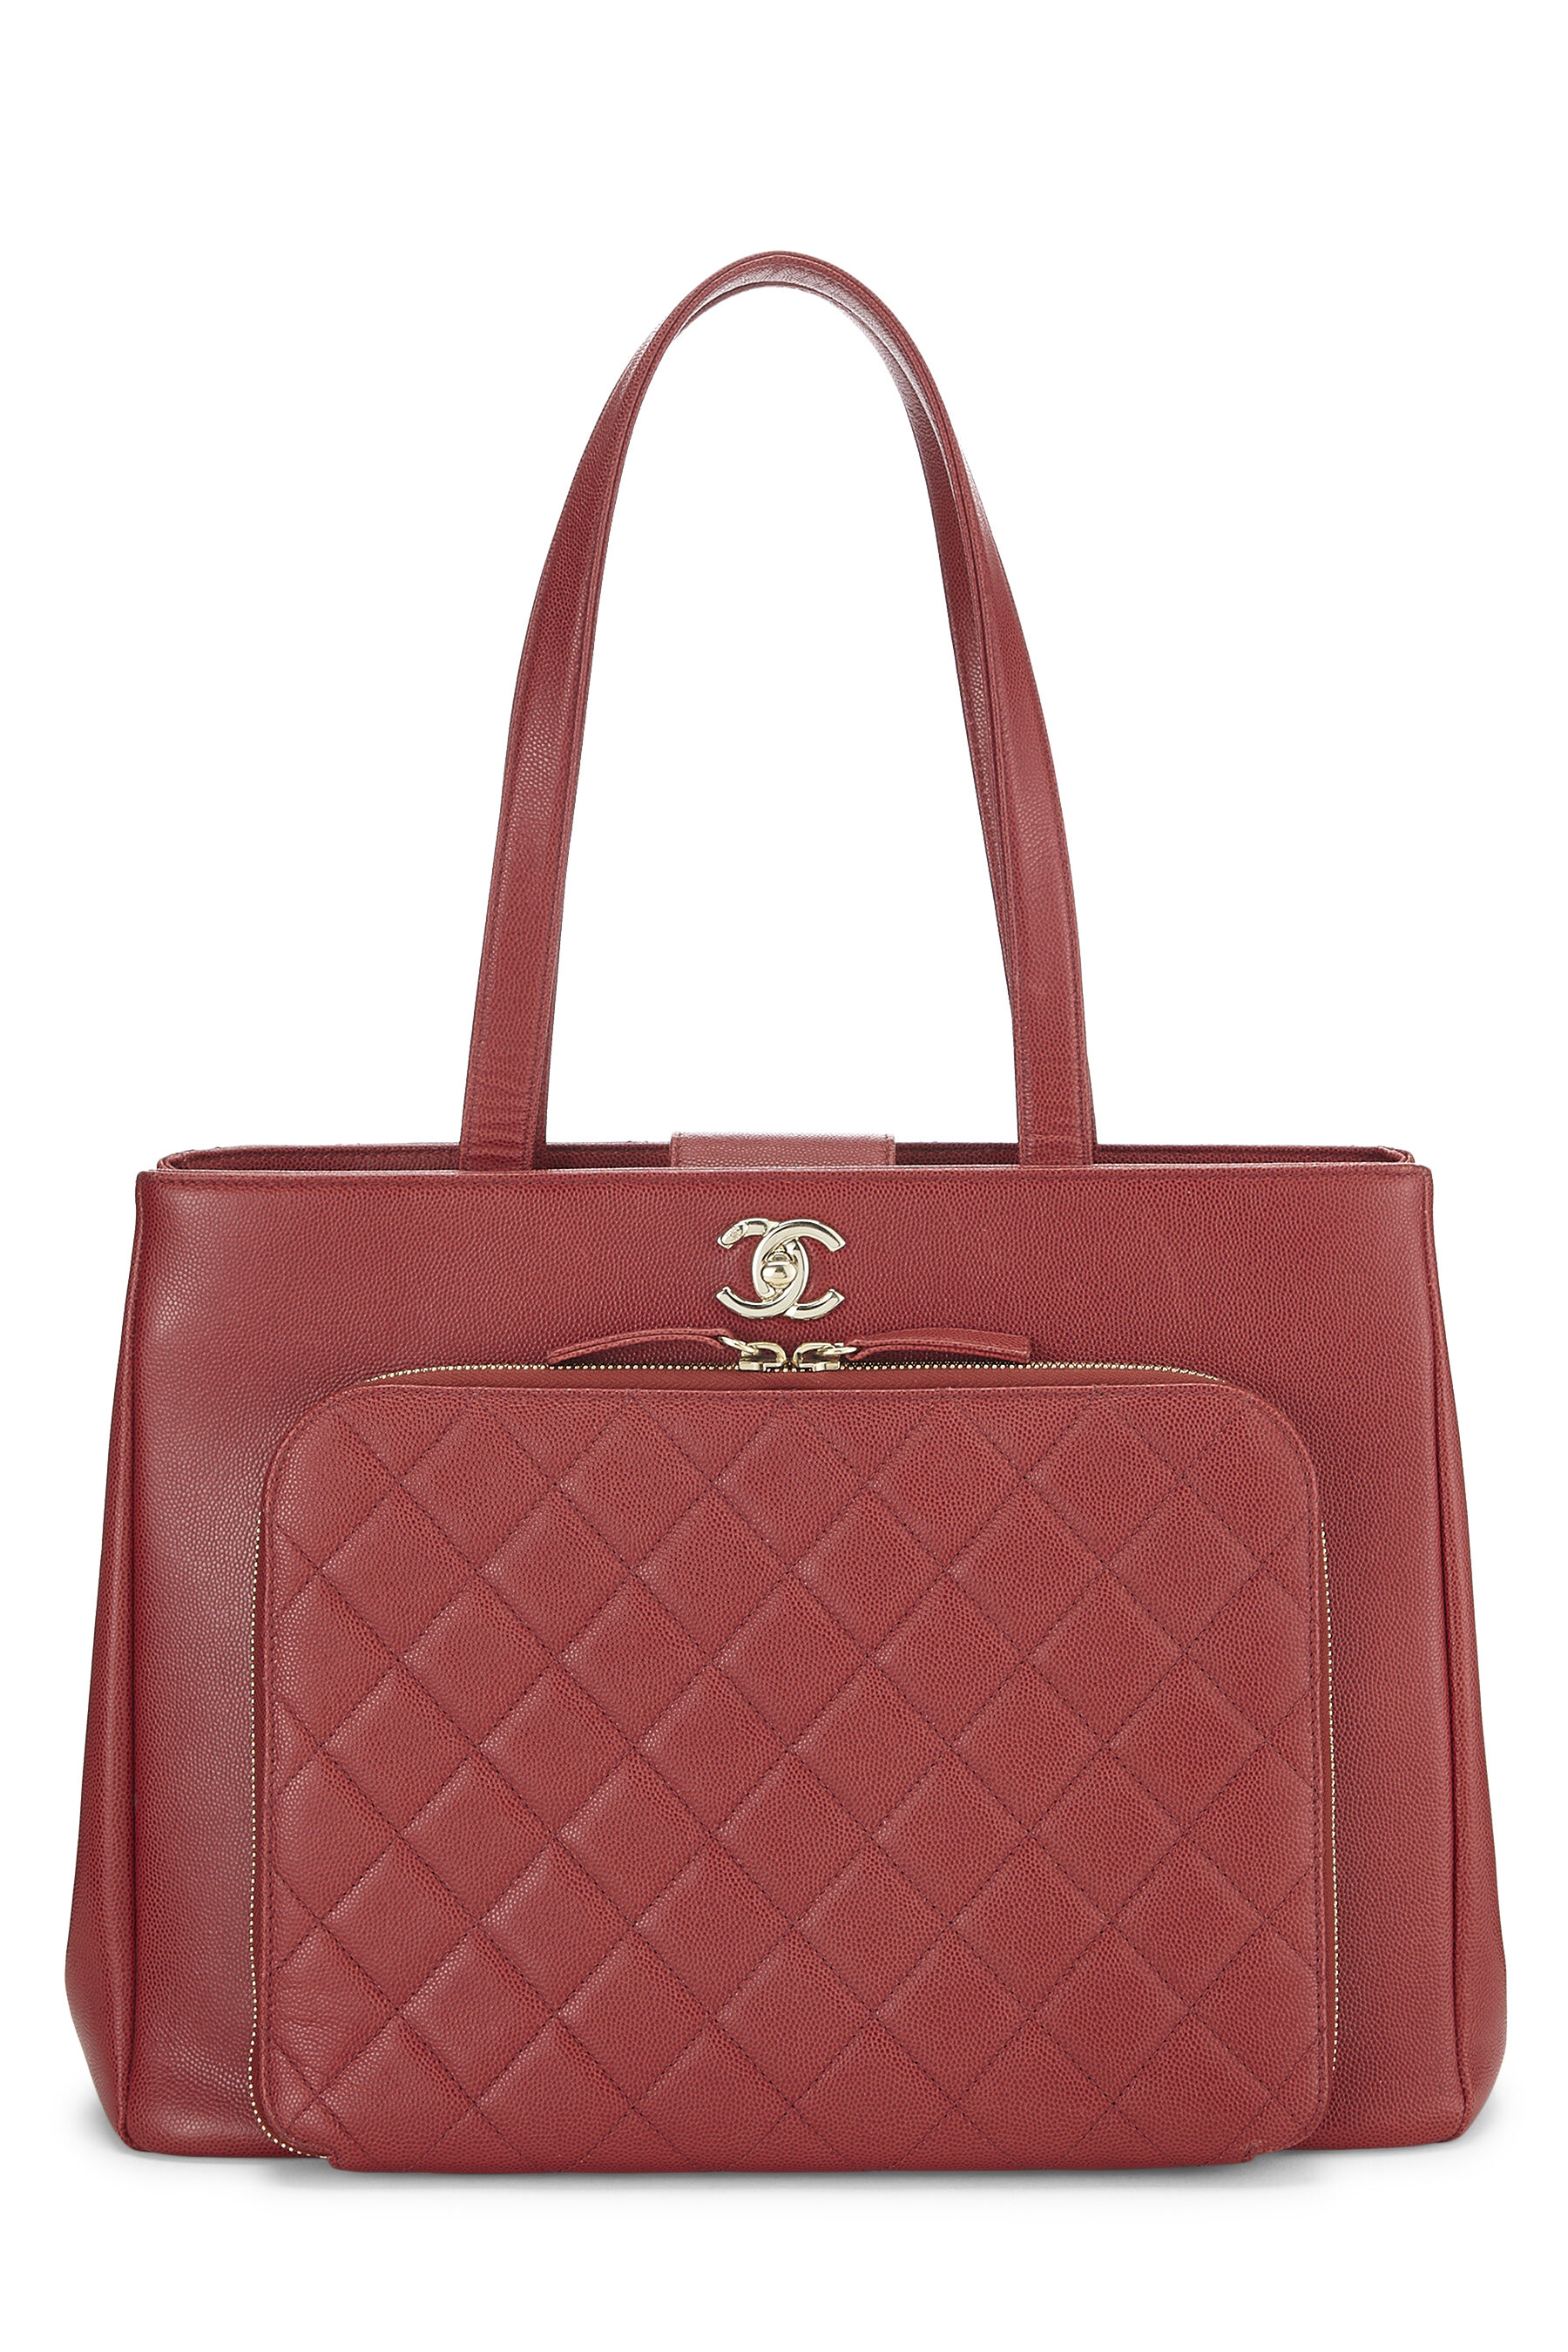 Chanel - Red Quilted Caviar Business Affinity Shopping Tote Large